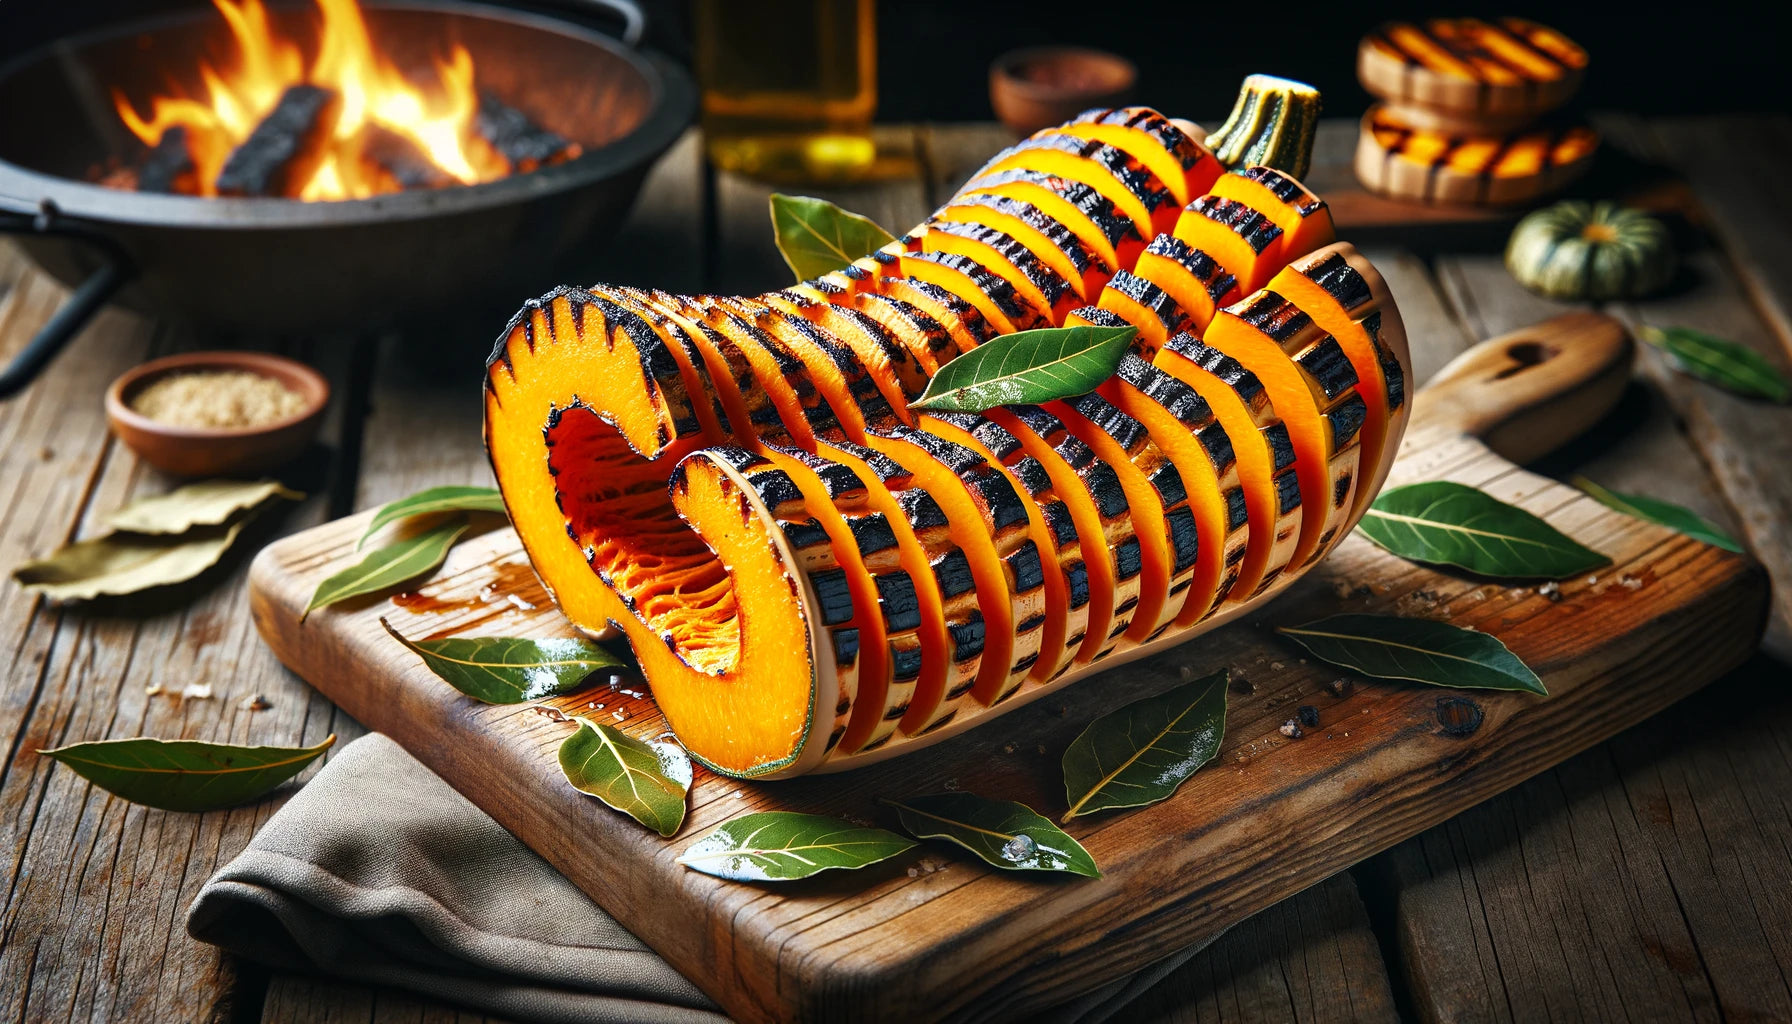 Hasselback Butternut Squash with Bay Leaves on the Grill.